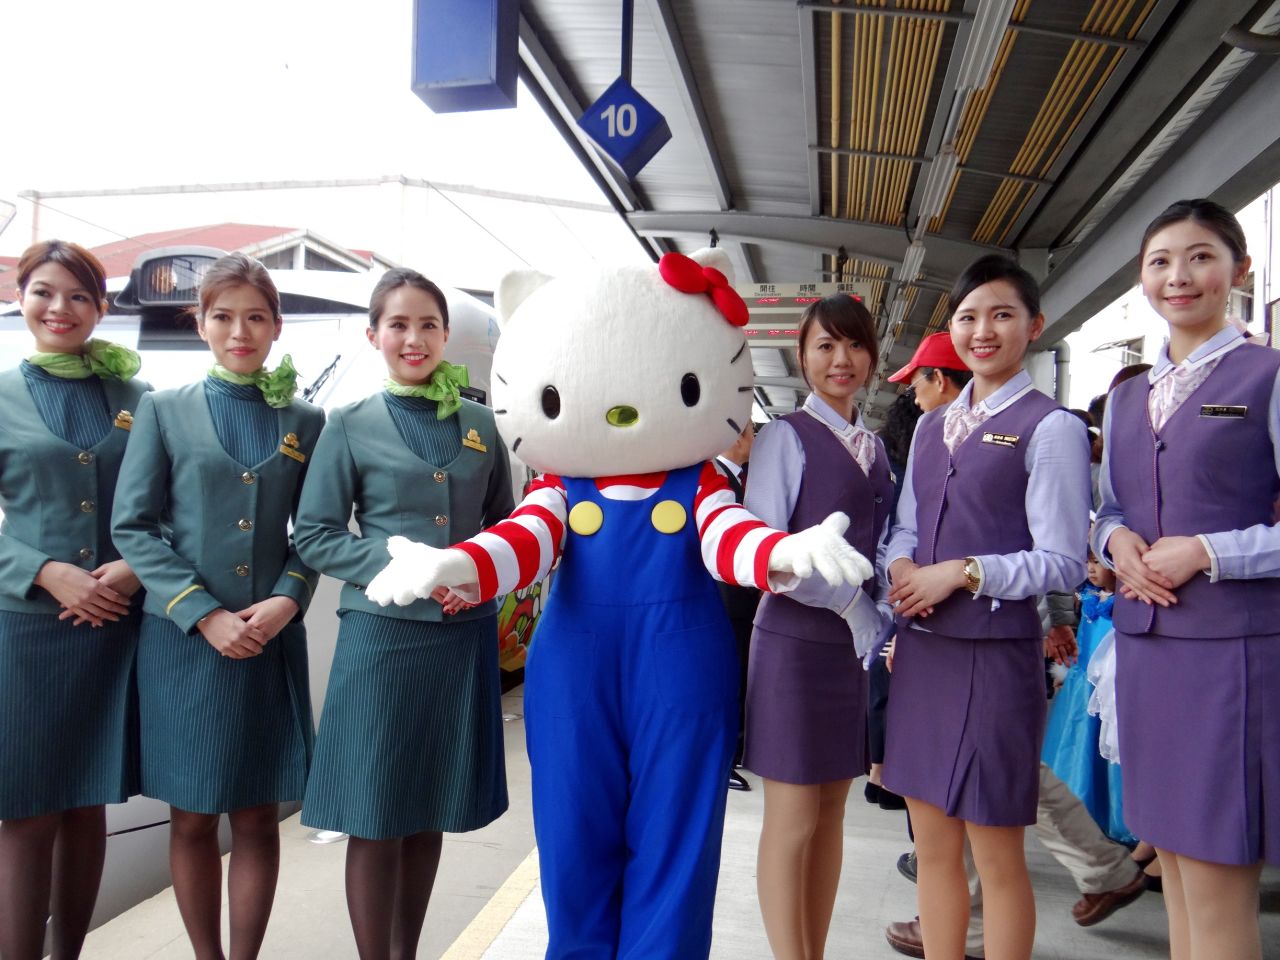 Starting April 21, the themed trains connecting Taipei and Taitung will run periodically on Fridays, Saturdays and Sundays. Though highly captivating, real-world Kitty -- here effortlessly upstaging everyday staffers at the train's inauguration -- will not appear on regular trips.